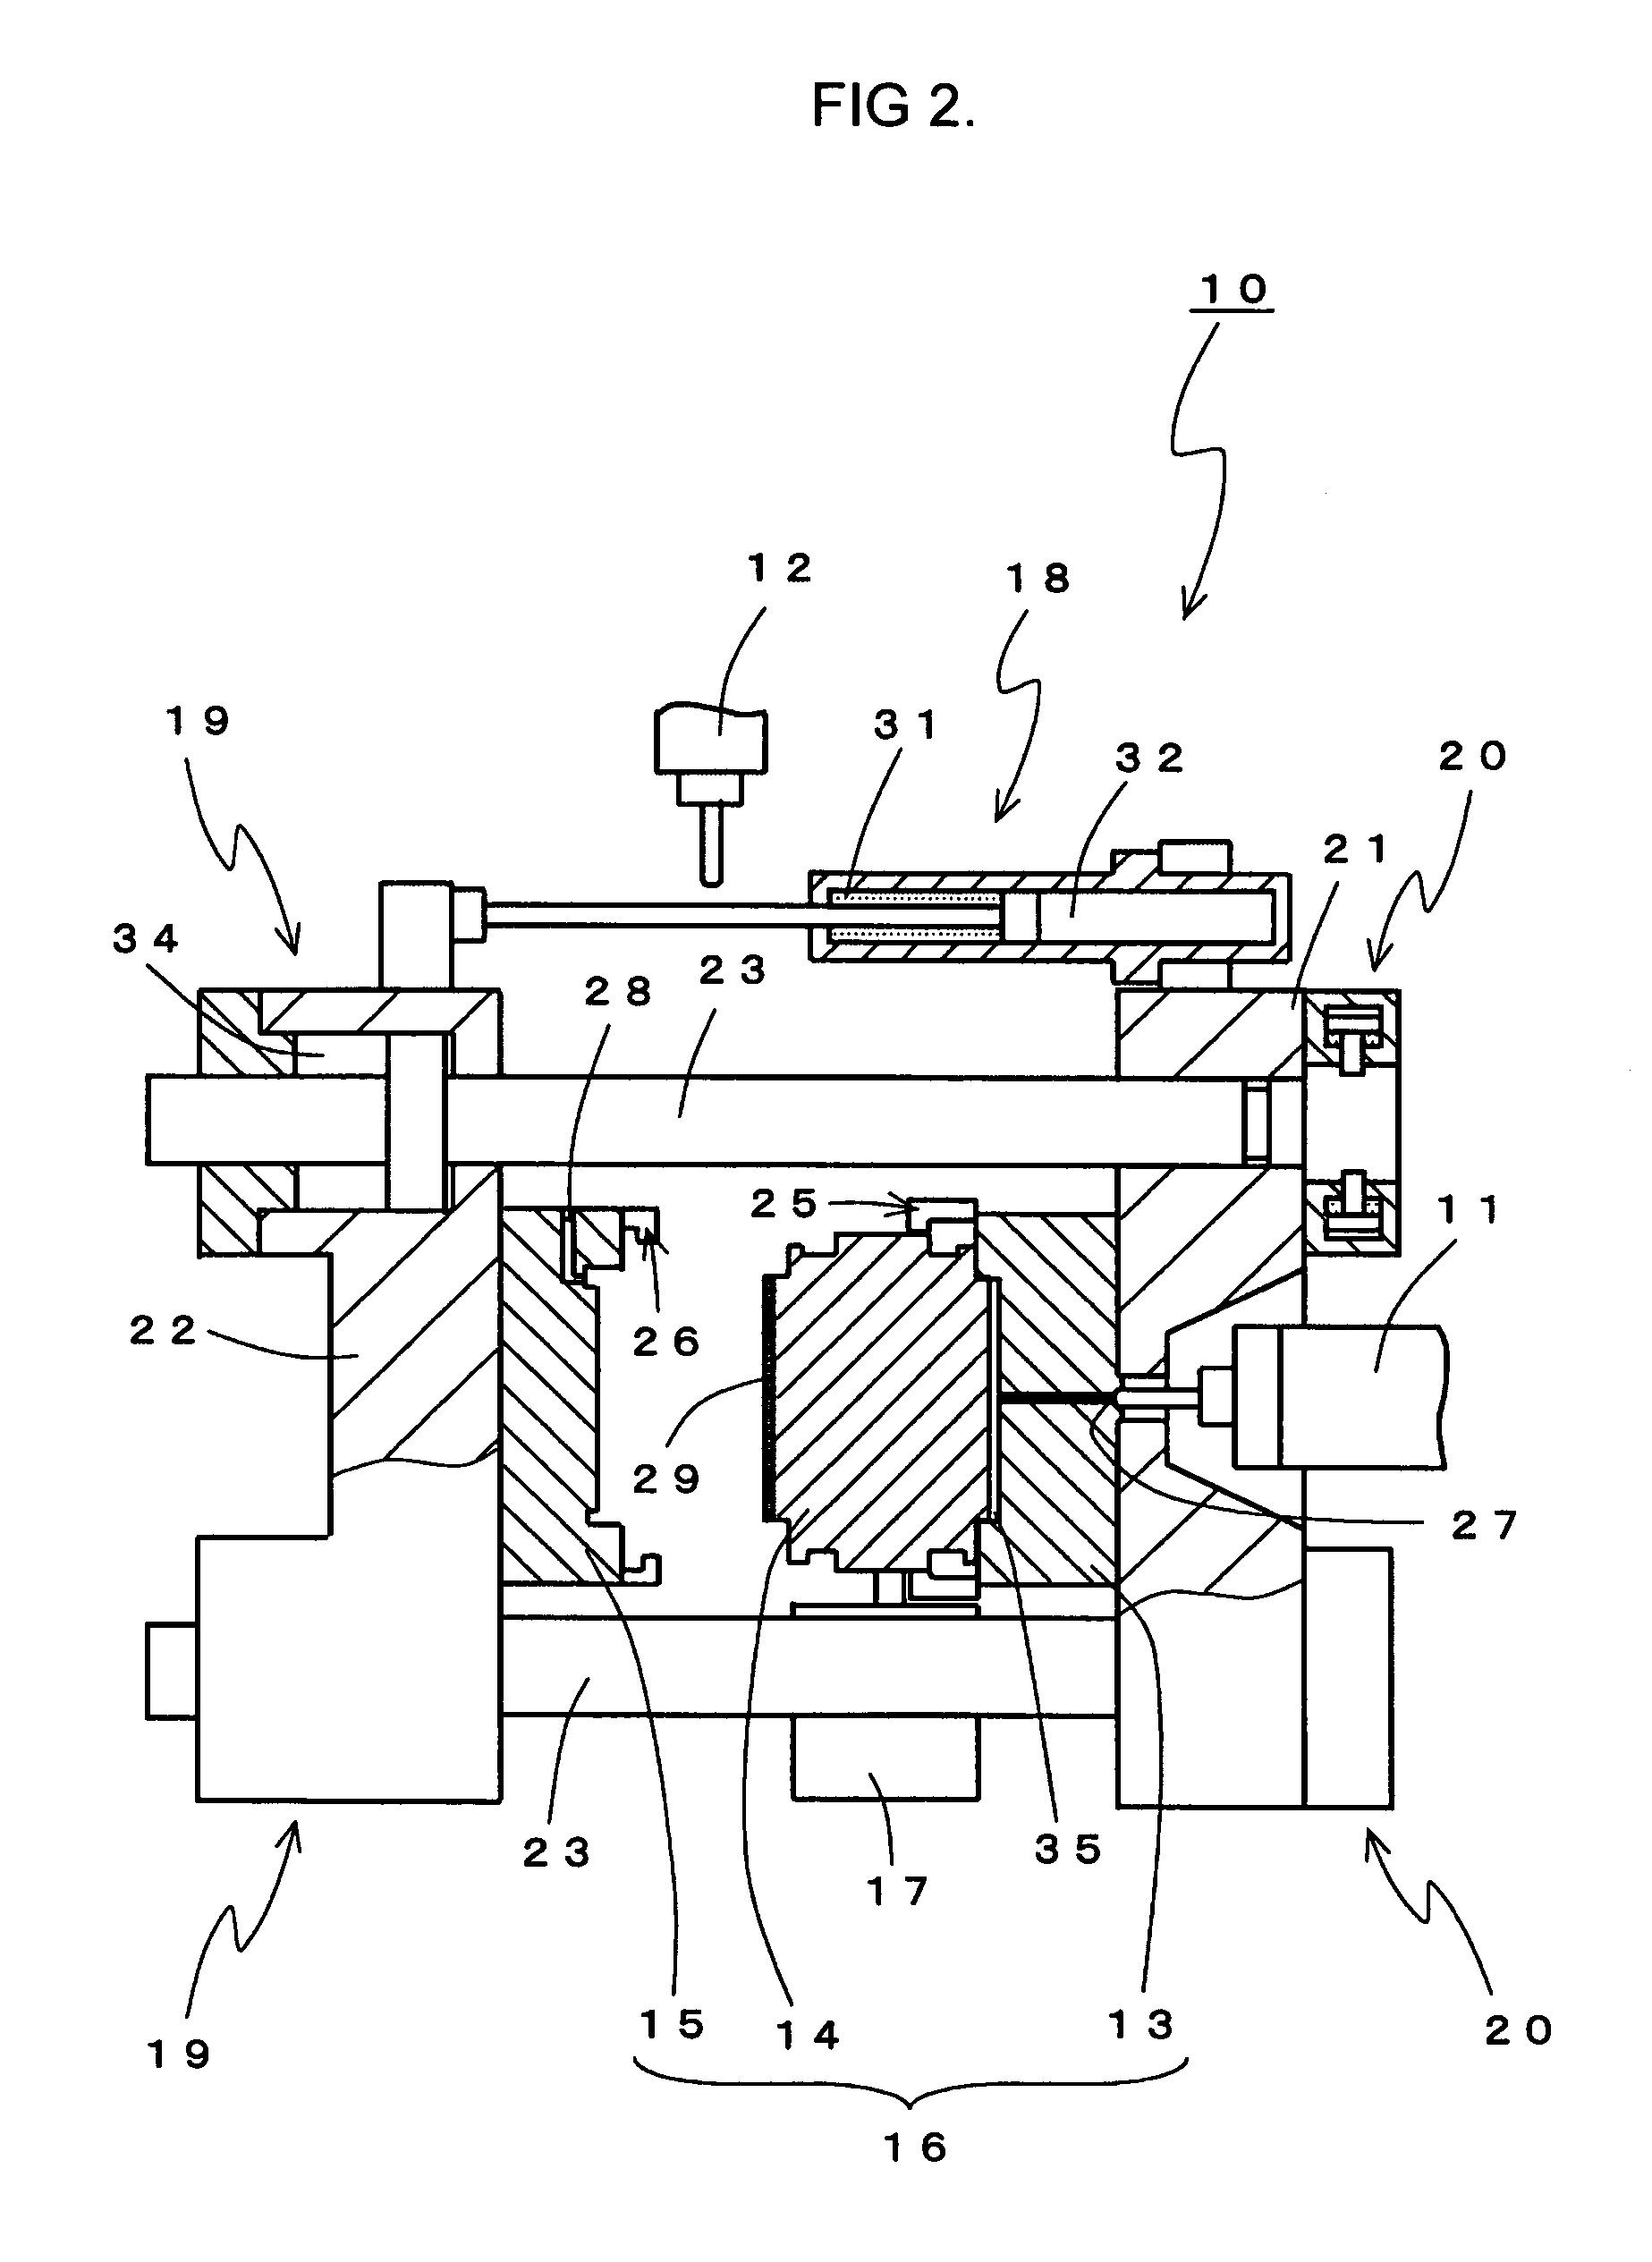 Mold system for composite molding